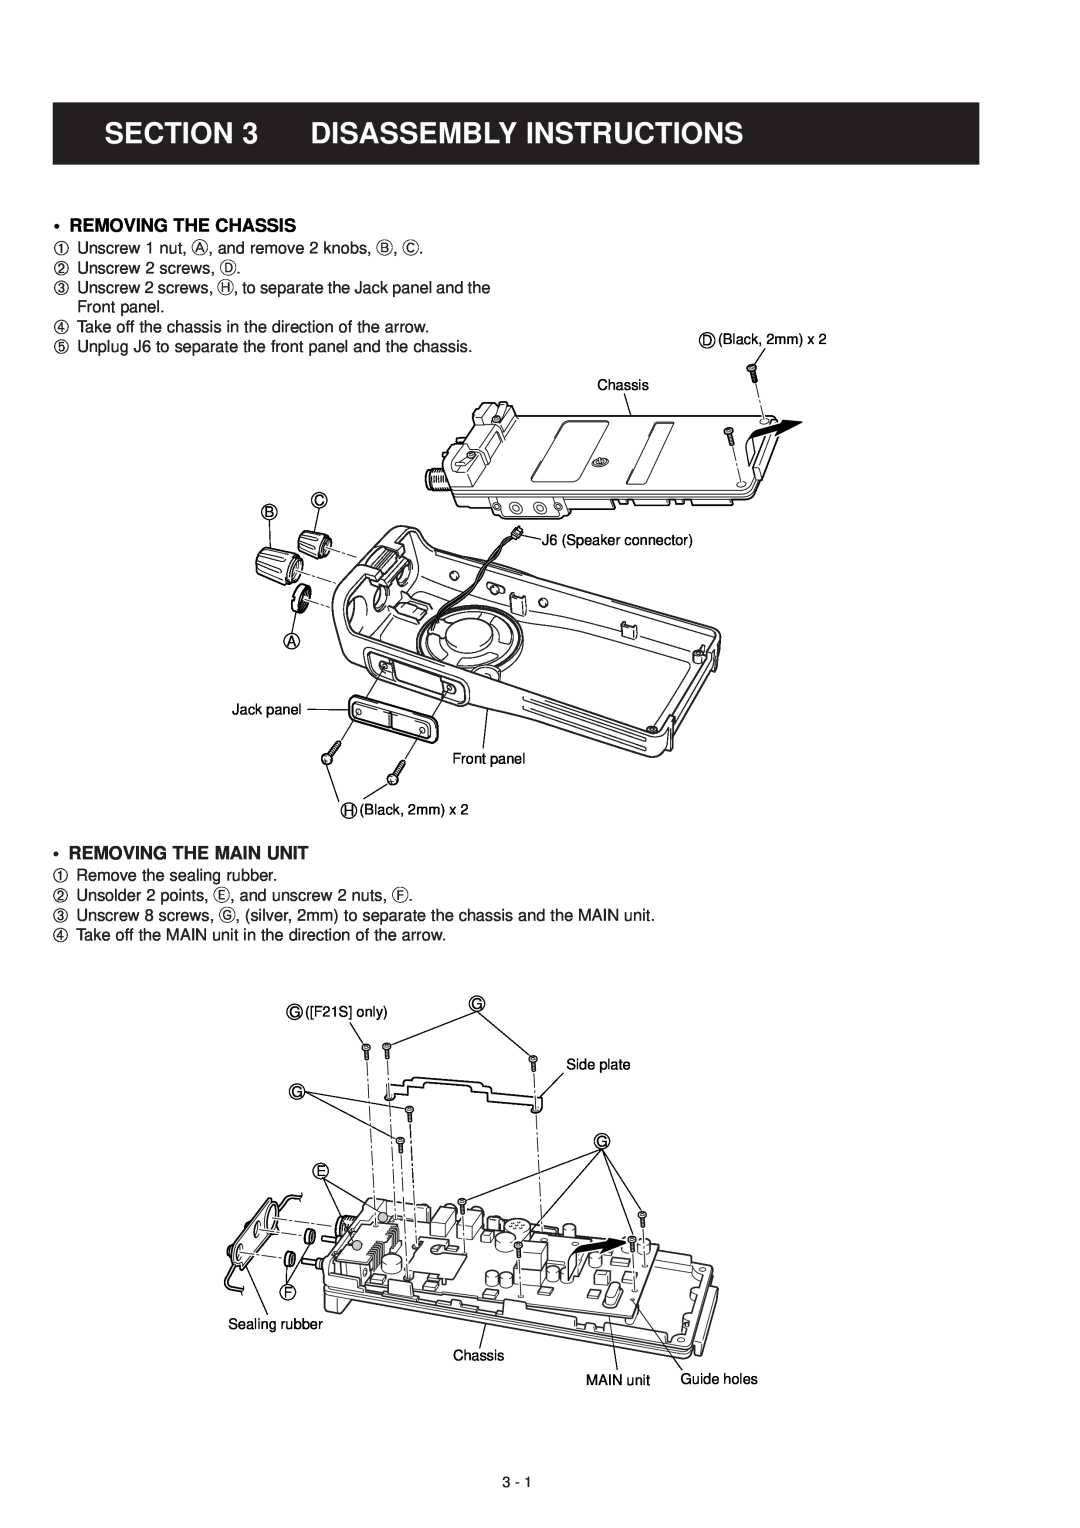 Icom IC-F21S service manual Disassembly Instructions, Removing The Chassis, Removing The Main Unit 